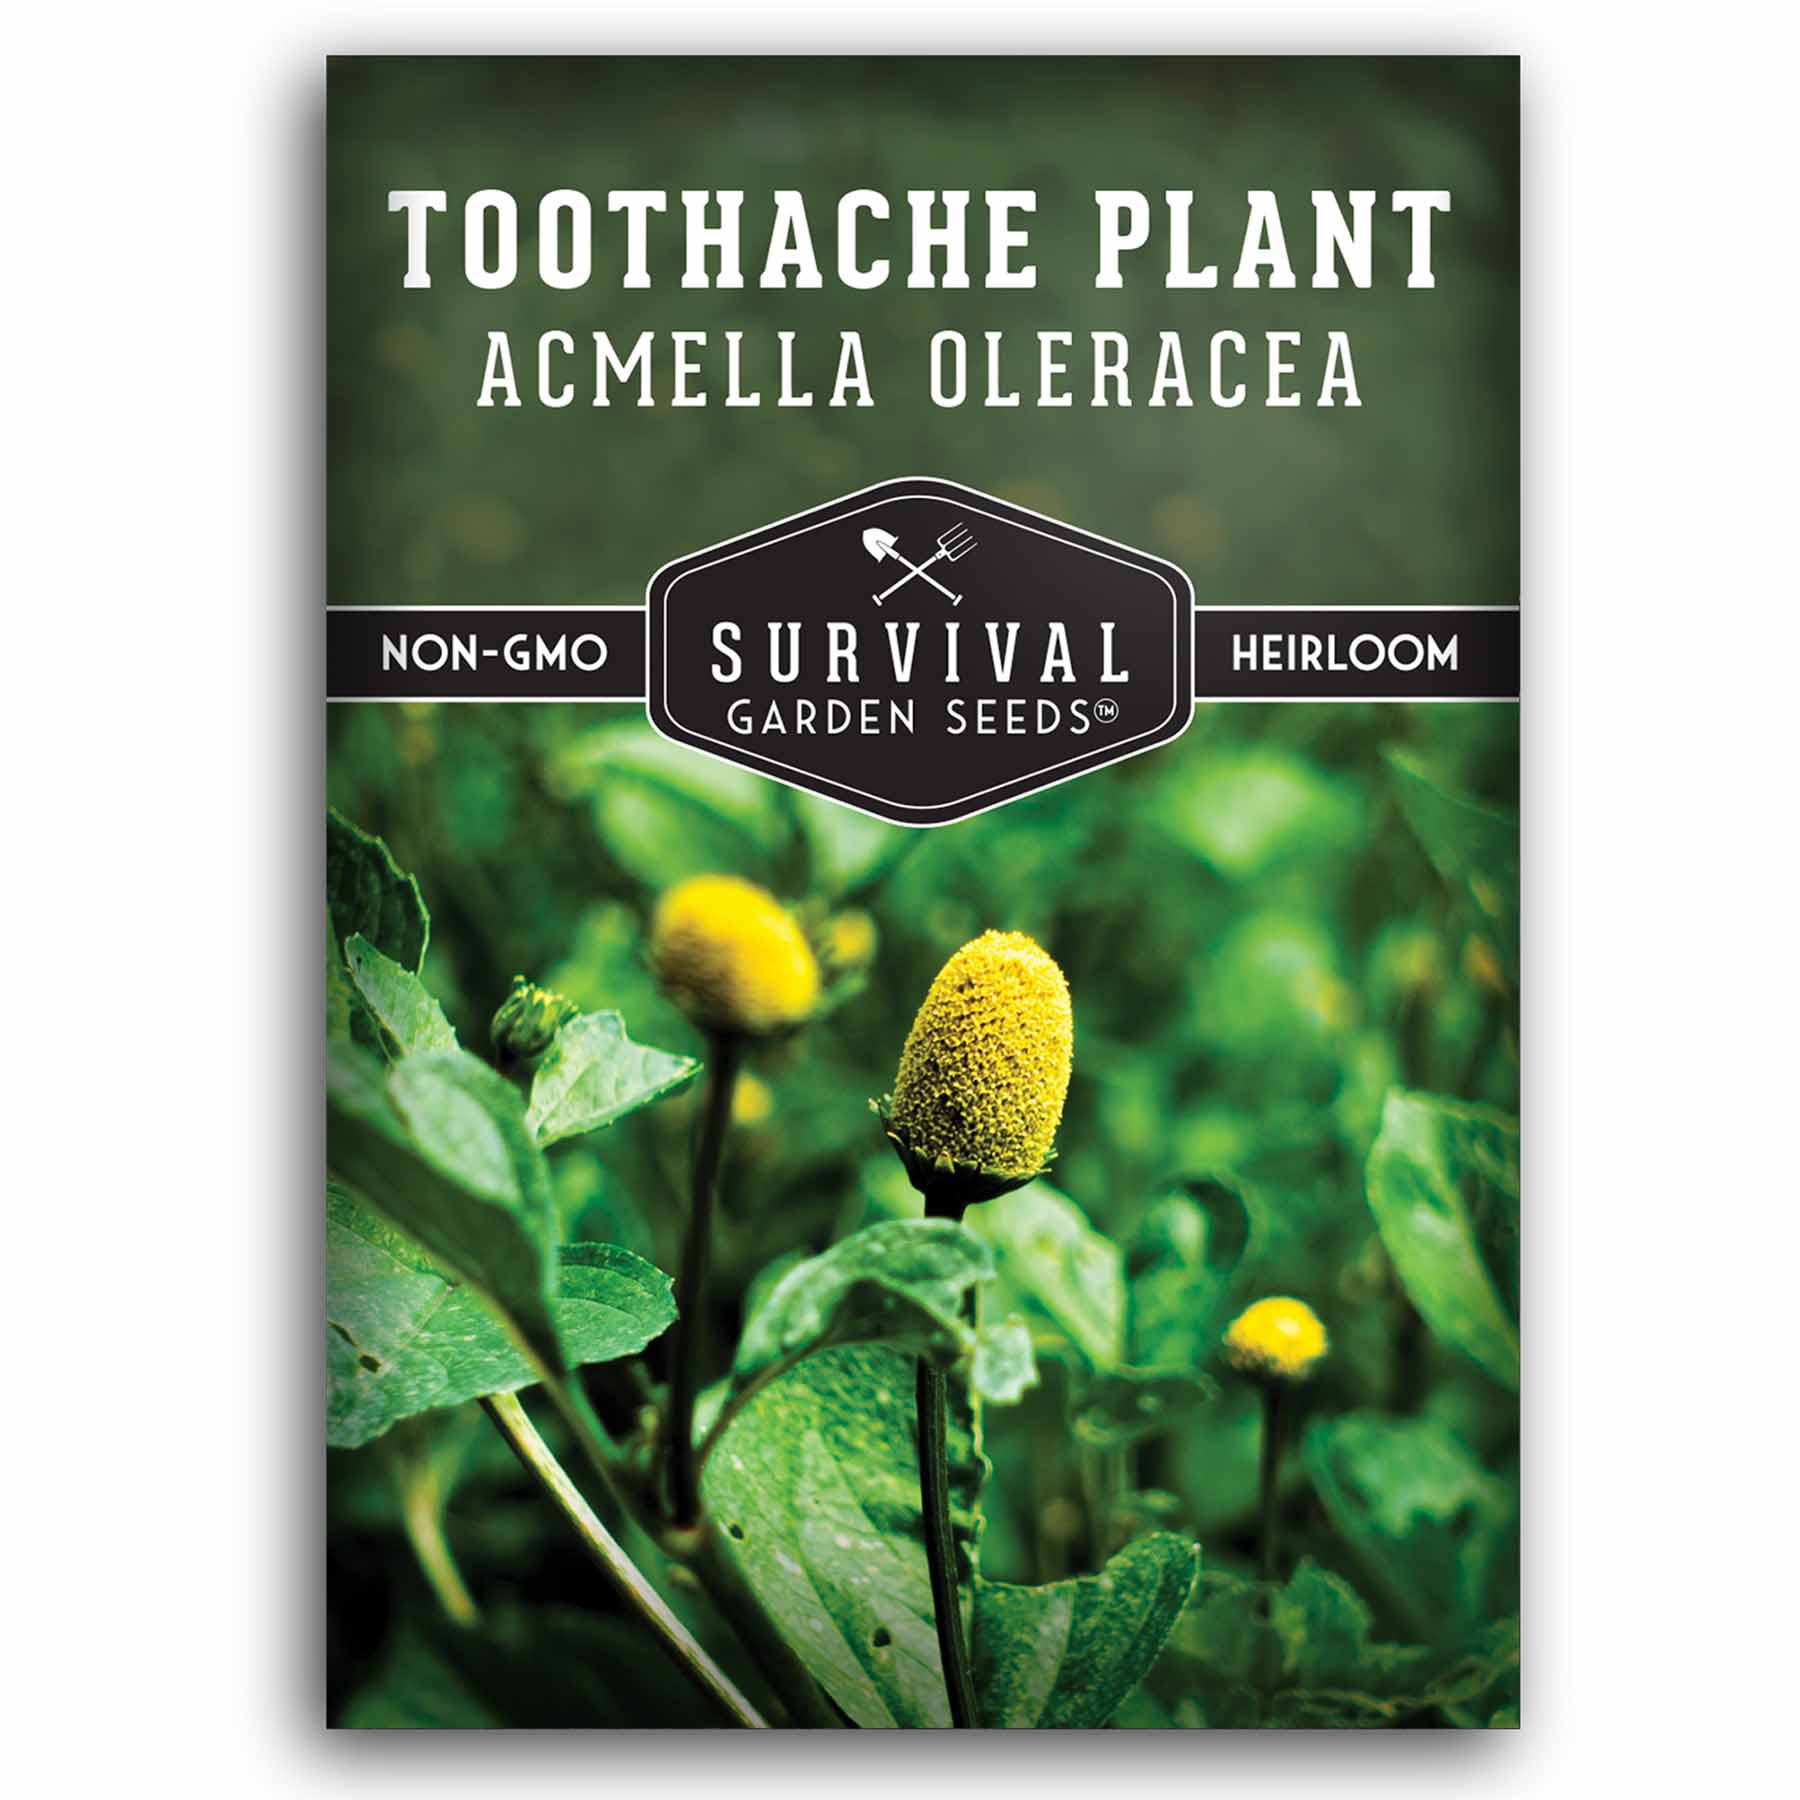 1 packet of Toothache Plant seeds